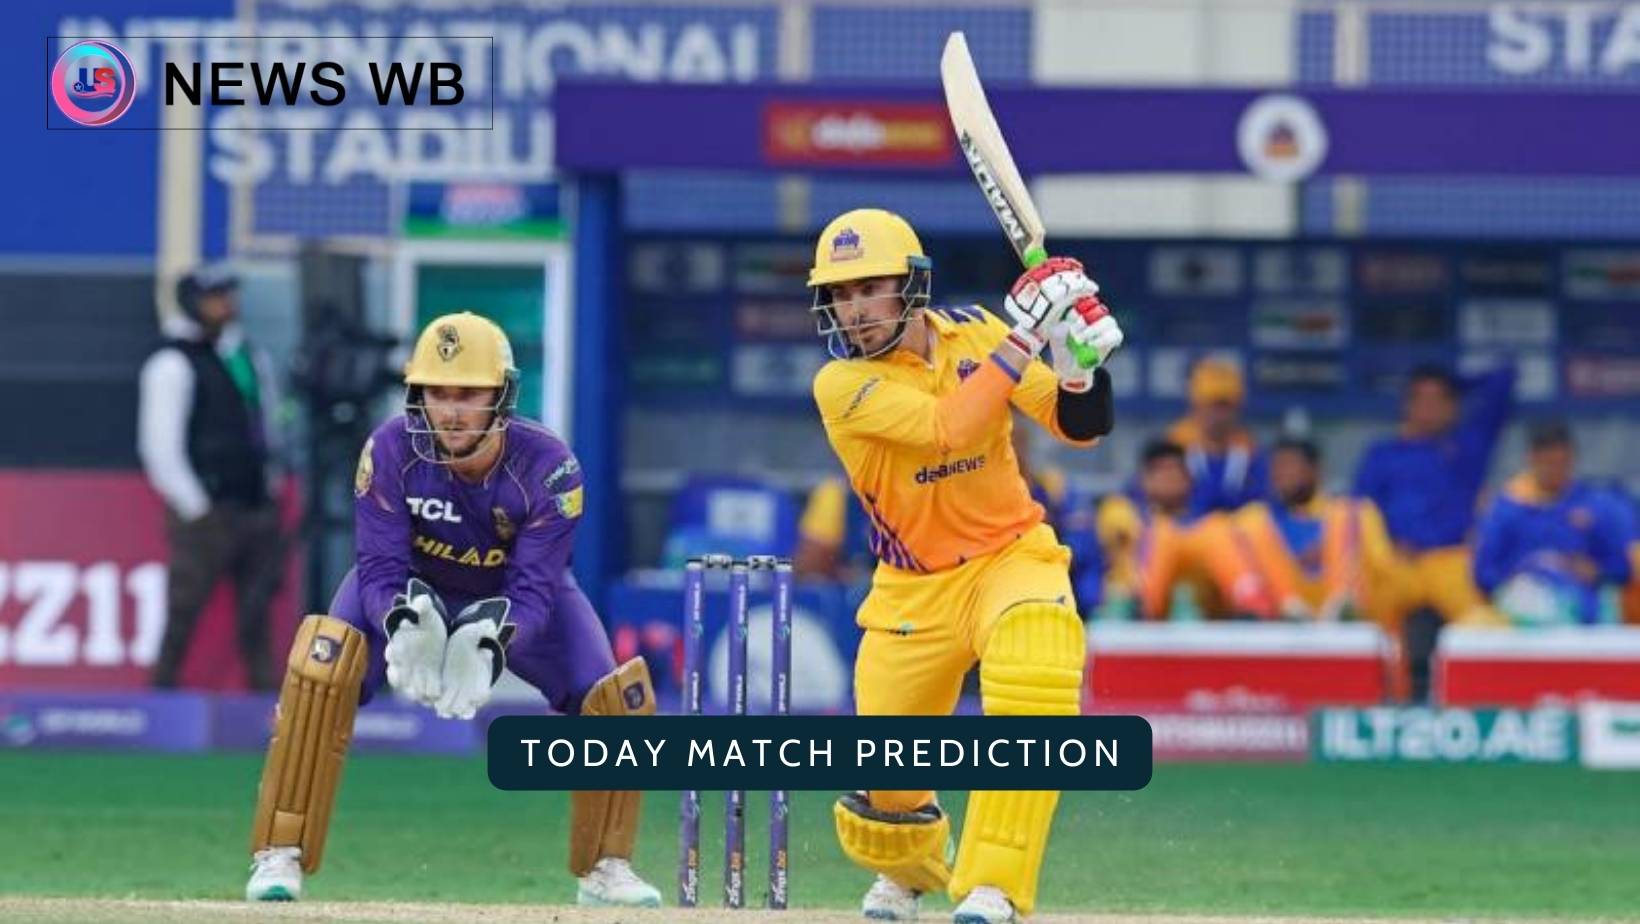 Today Match Prediction: SW vs ADKR Dream11 Team, Sharjah Warriors vs Abu Dhabi Knight Riders 23rd Match, Who Will Win?